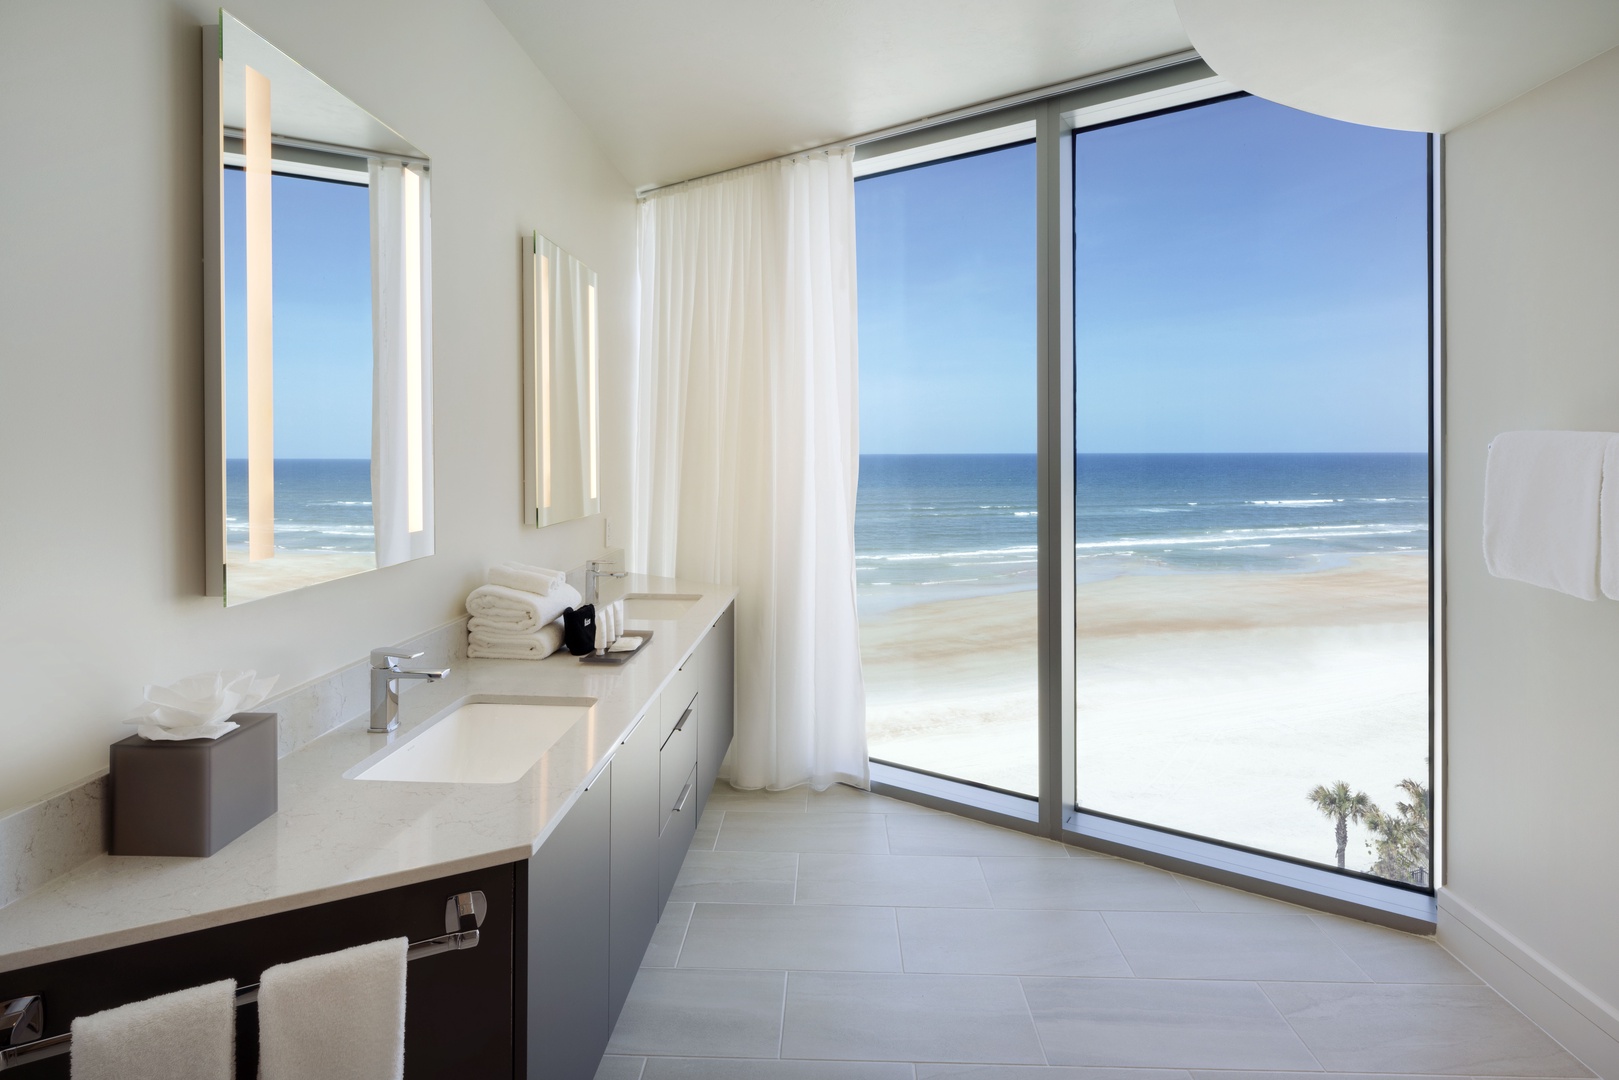 Bathing with a View: Luxurious Bathroom Designed for Relaxation and Ocean Vistas